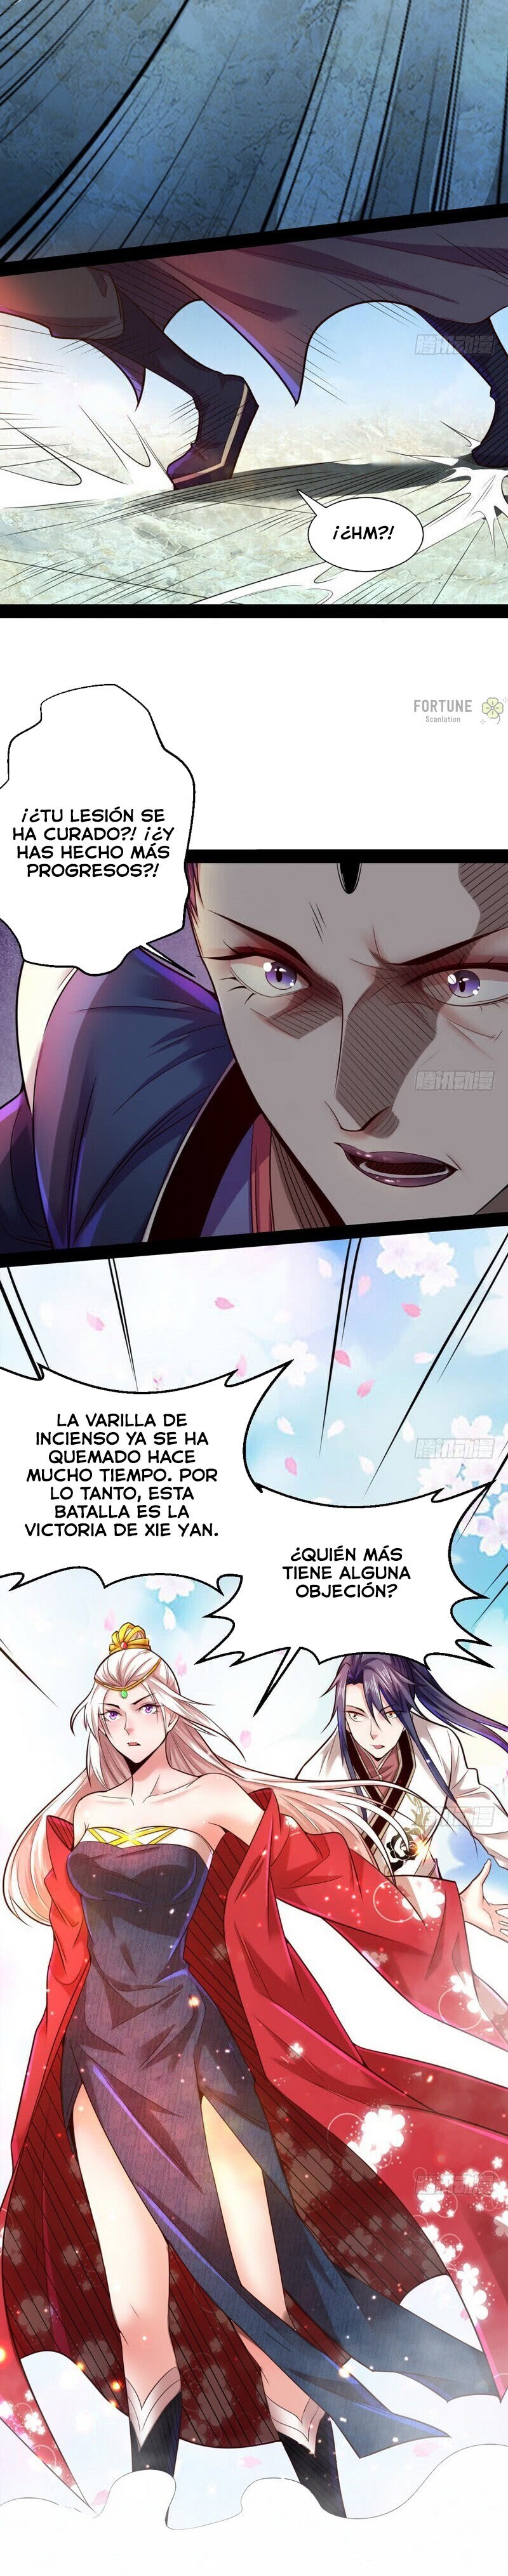 Manga Soy un dios maligno Chapter 15 image number 11